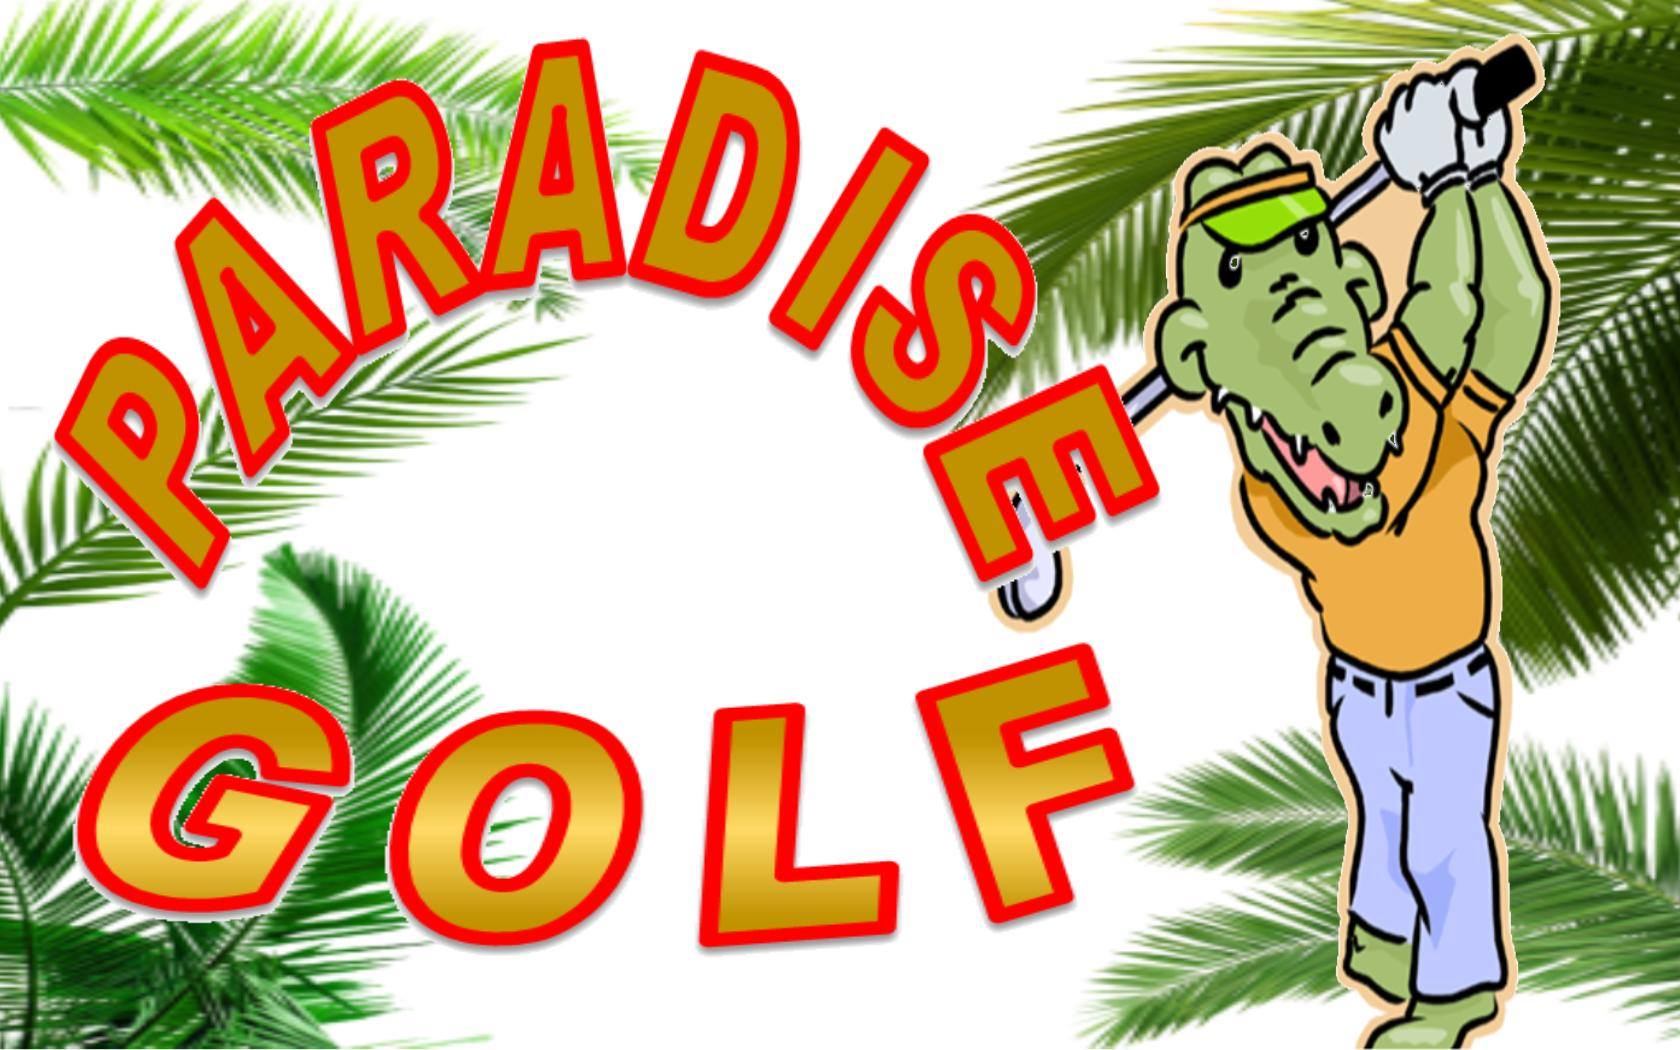 Golf in Paradise with a human Crocodile and golf wedges in hand